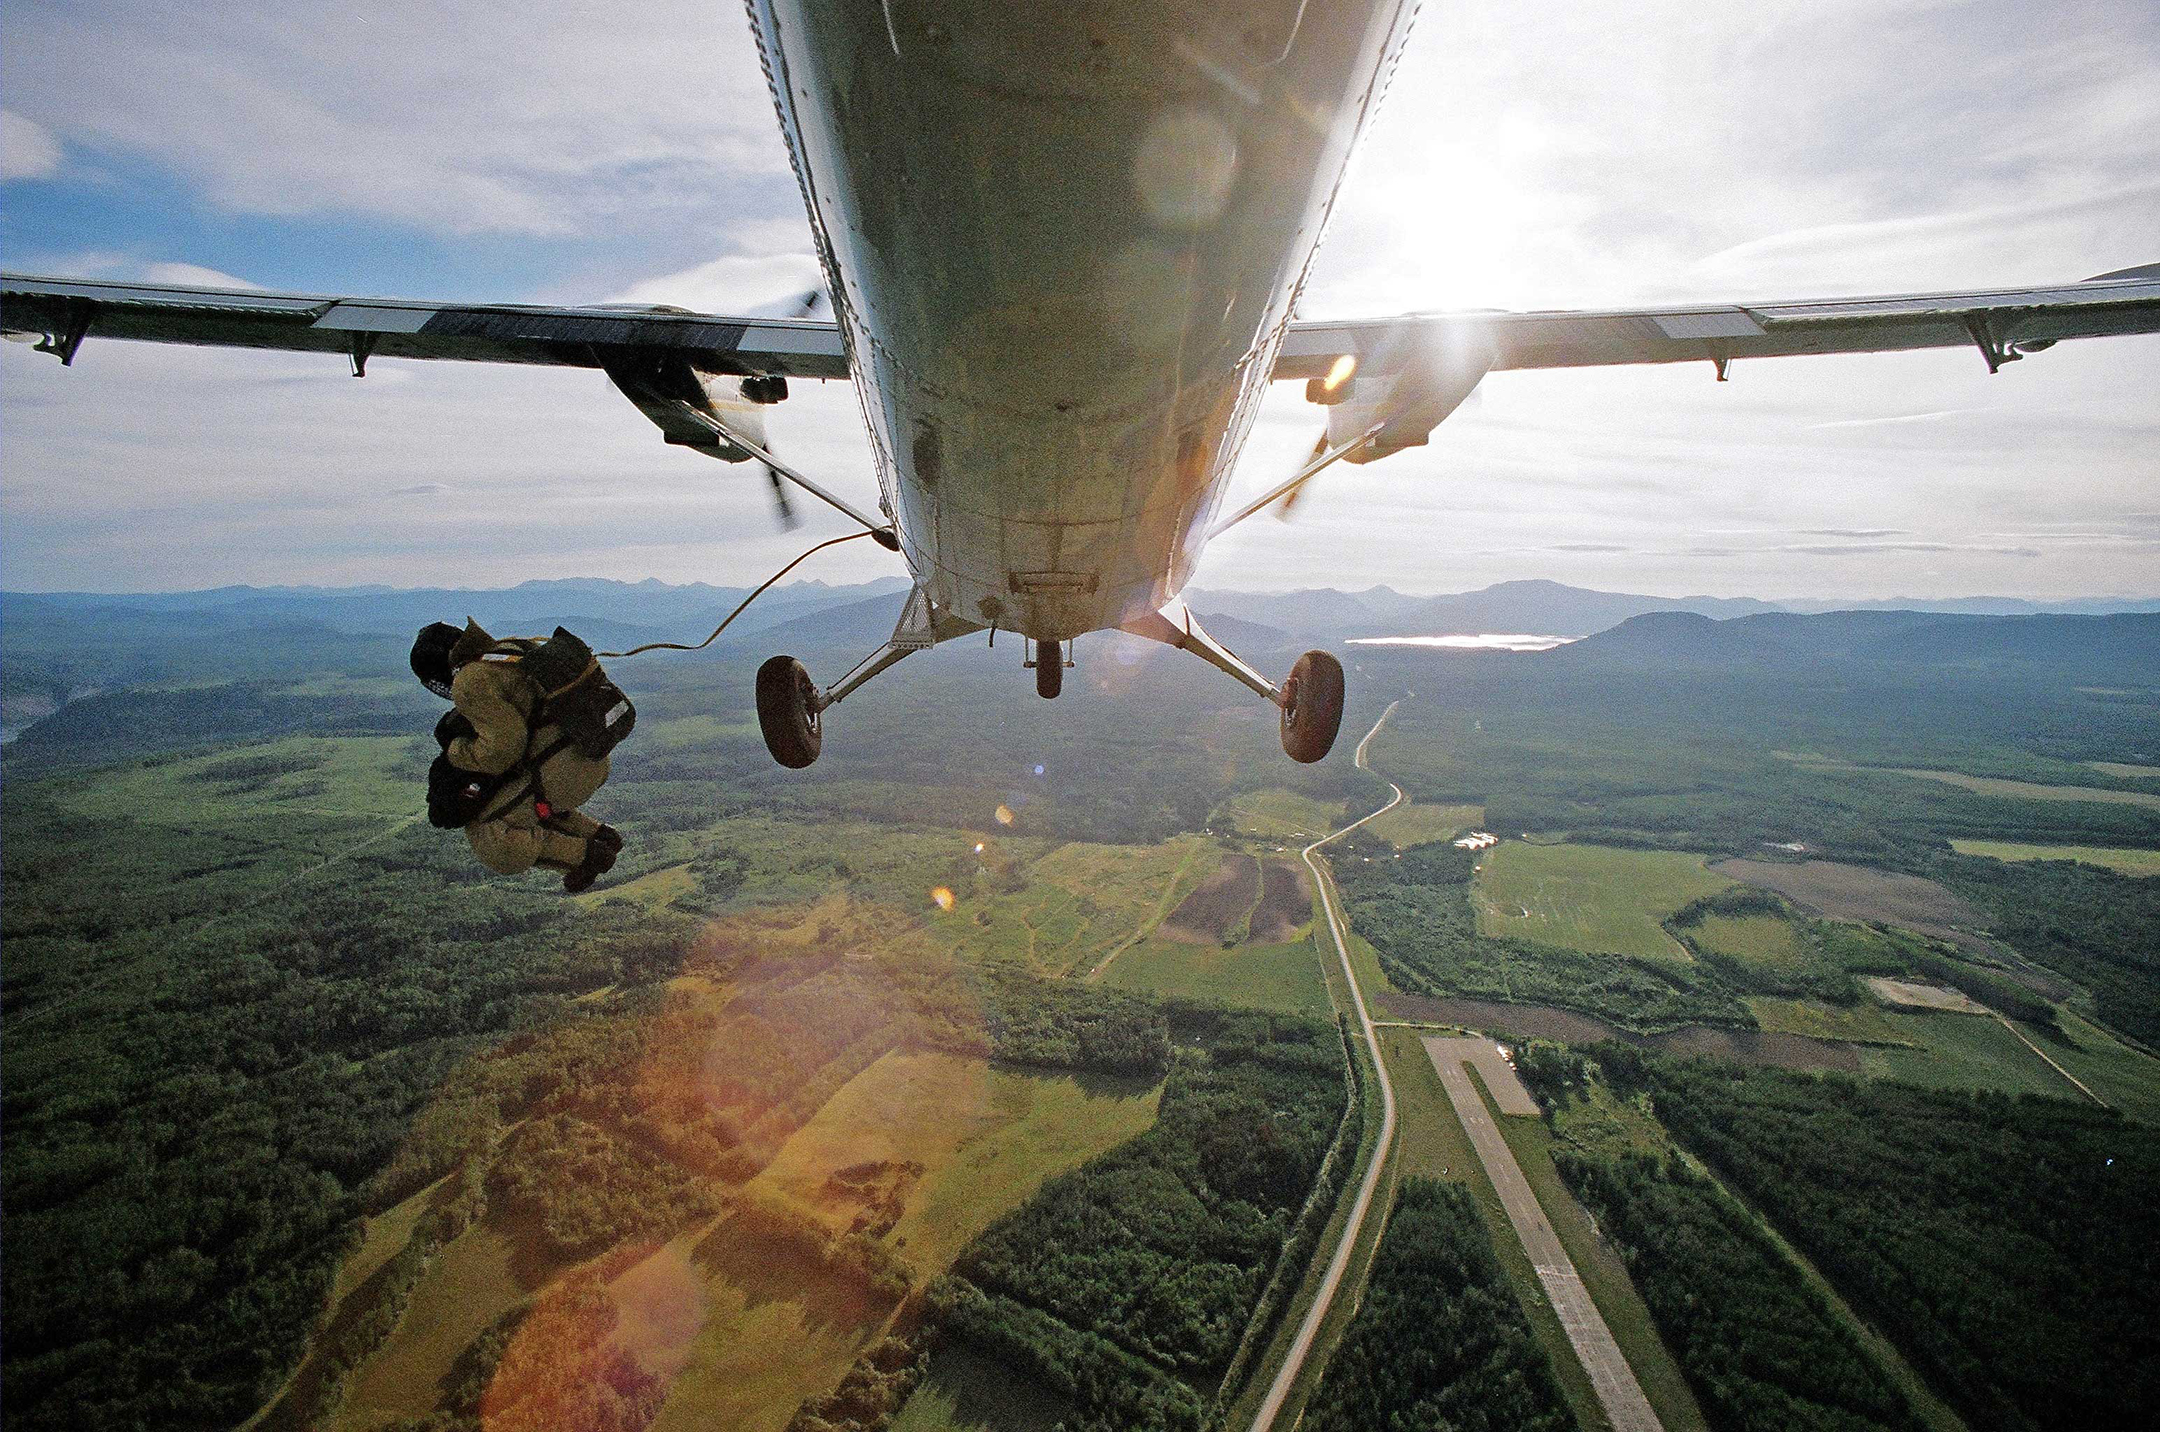 Firefighter parachuting out of an airplane